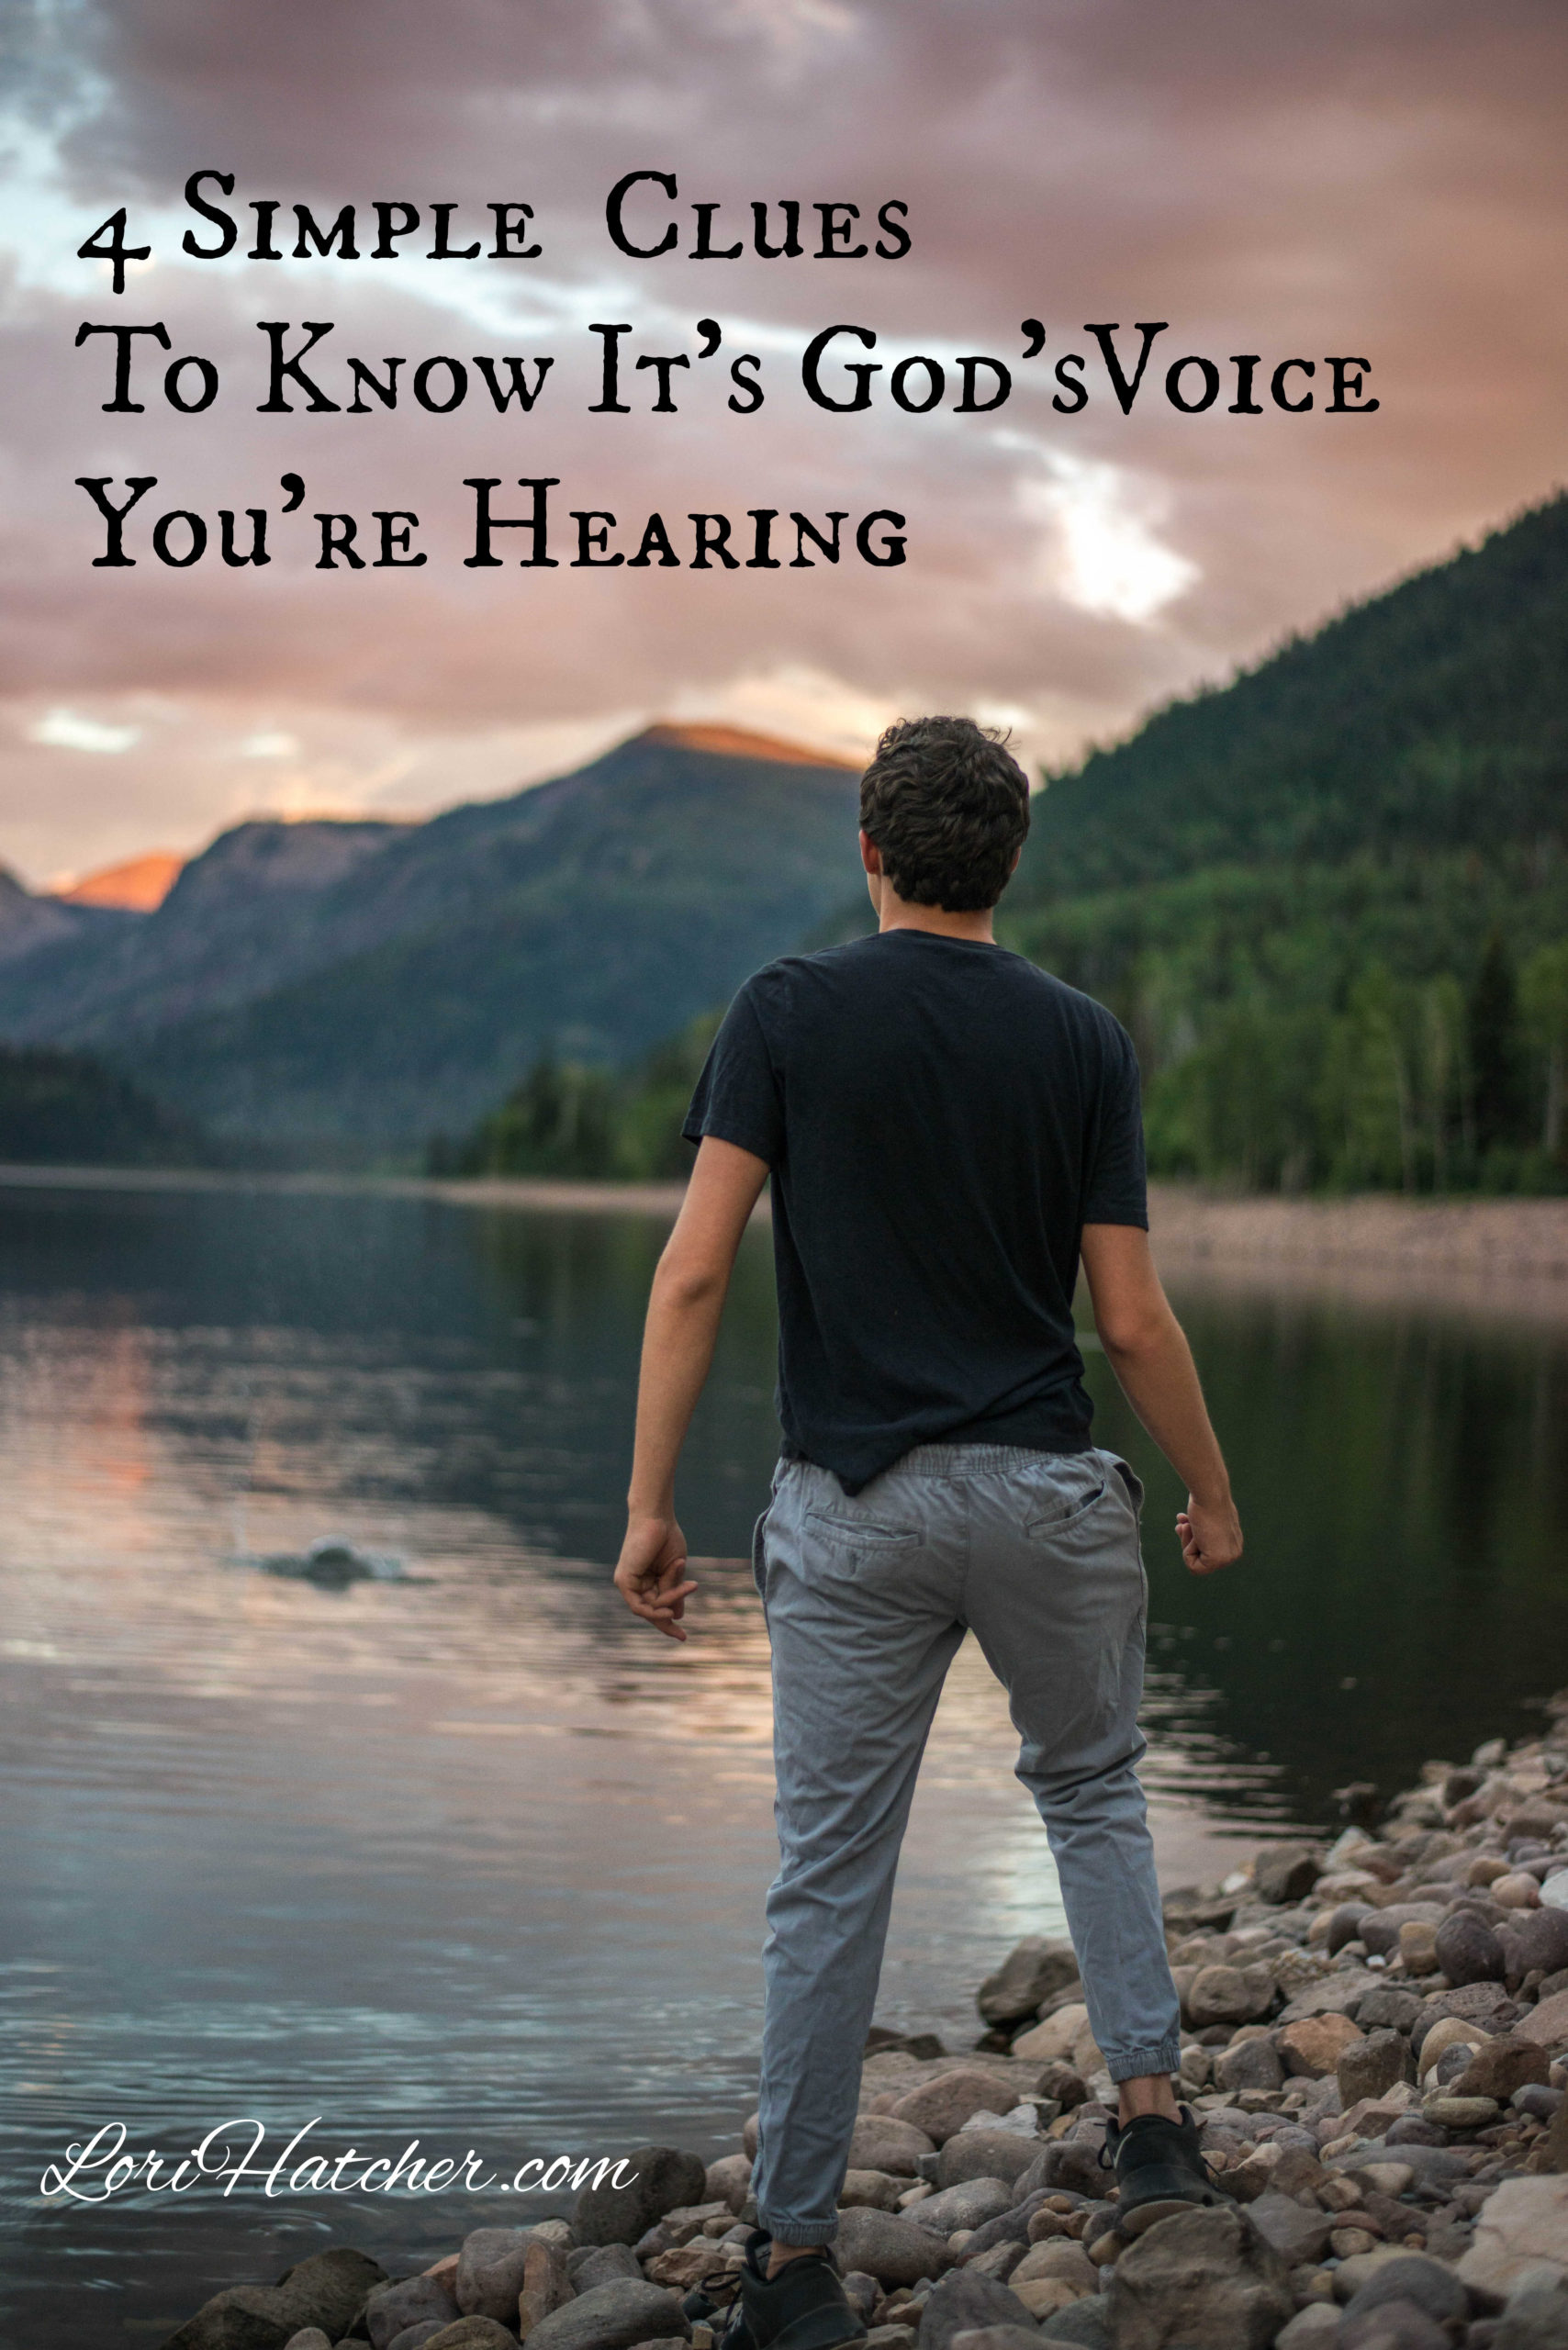 4 Simple Clues to Know It’s God’s Voice You’re Hearing